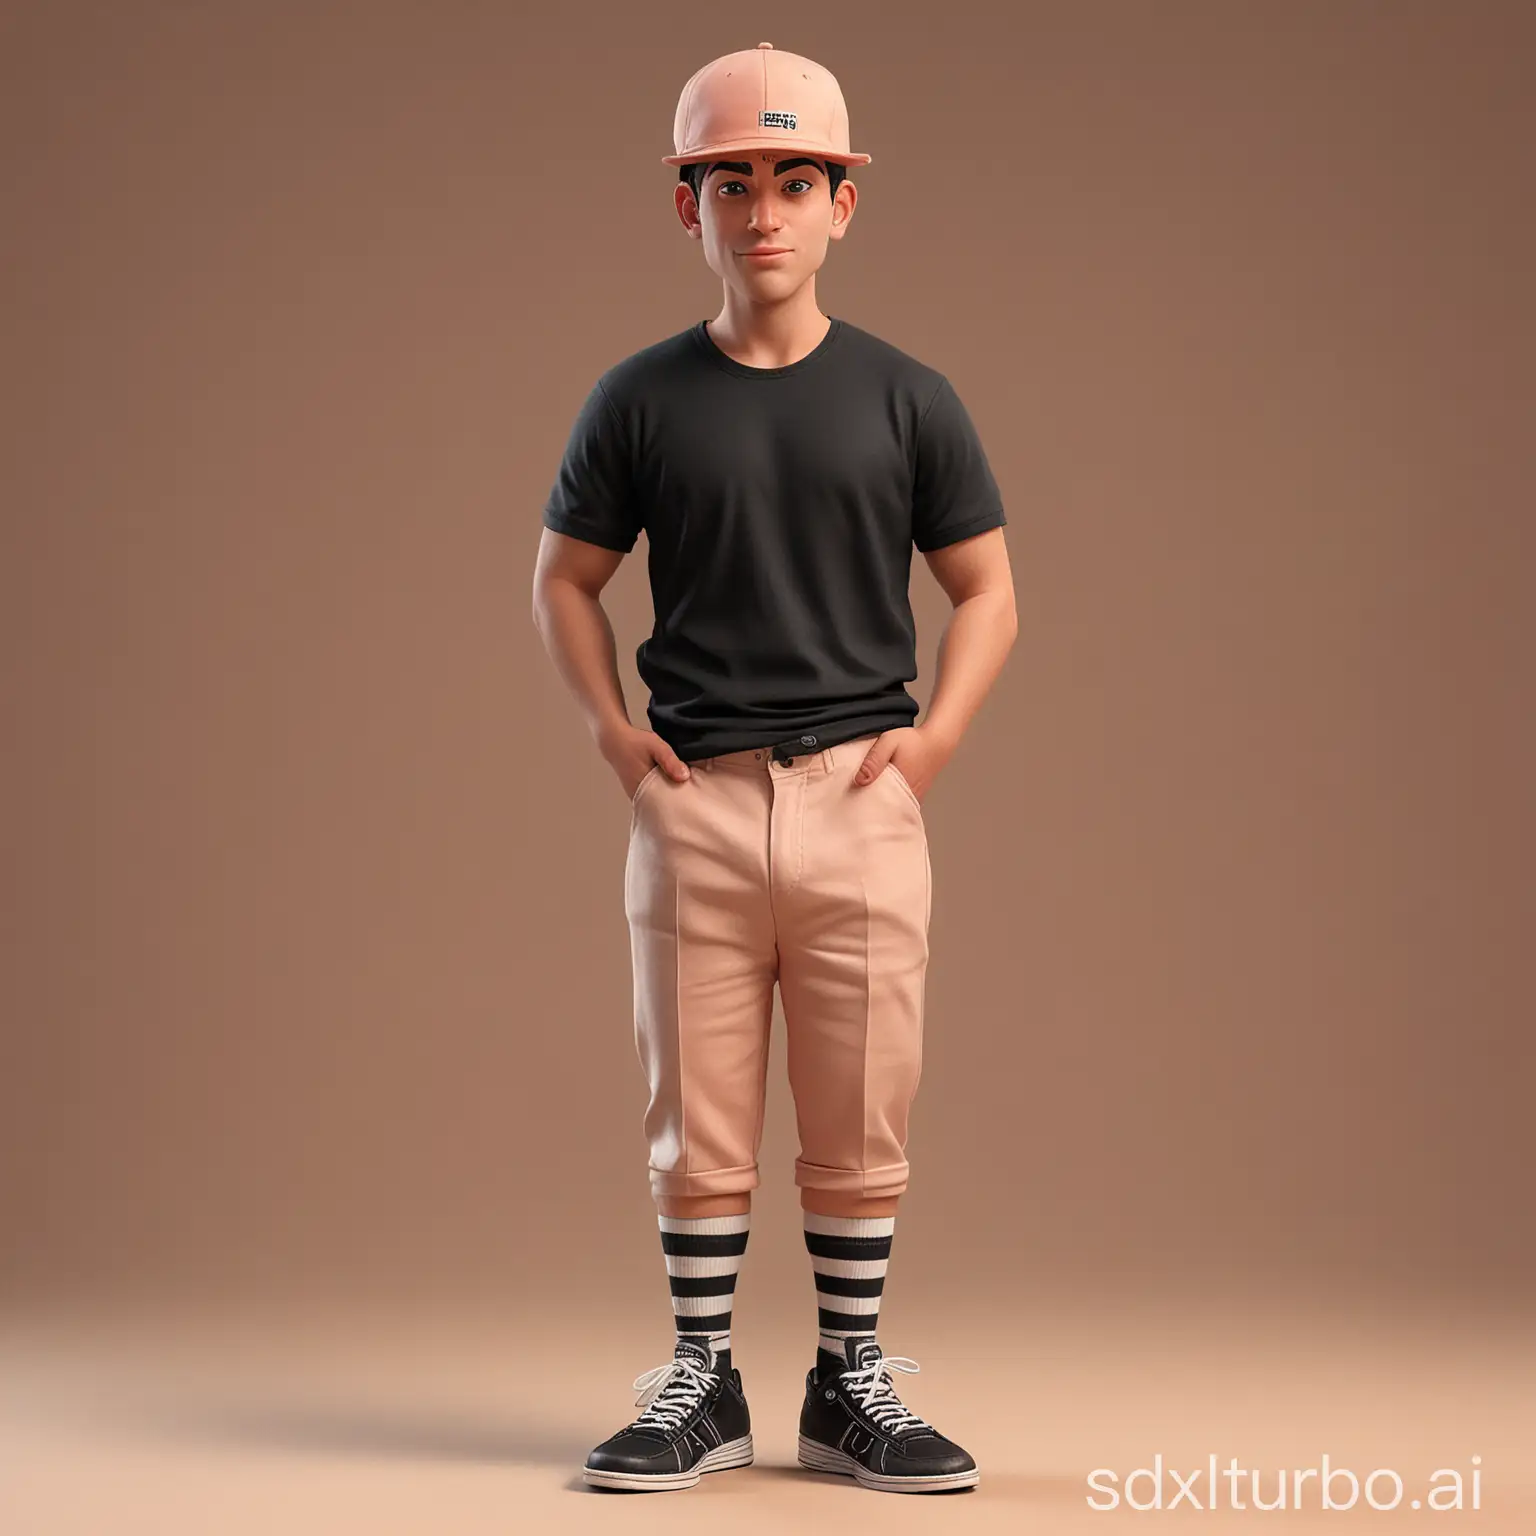 Create a realistic caricature 3D Cartoon style full body with a big head. A young man standing with proud pose. Thin body, wearing black cap, black t-shirt, black trousers. wearing black shoes combined with a black and white striped socks. Peach solid Colored background. Use soft photography lighting, top lighting, side lighting. high resolution images, Uhd, 16k.